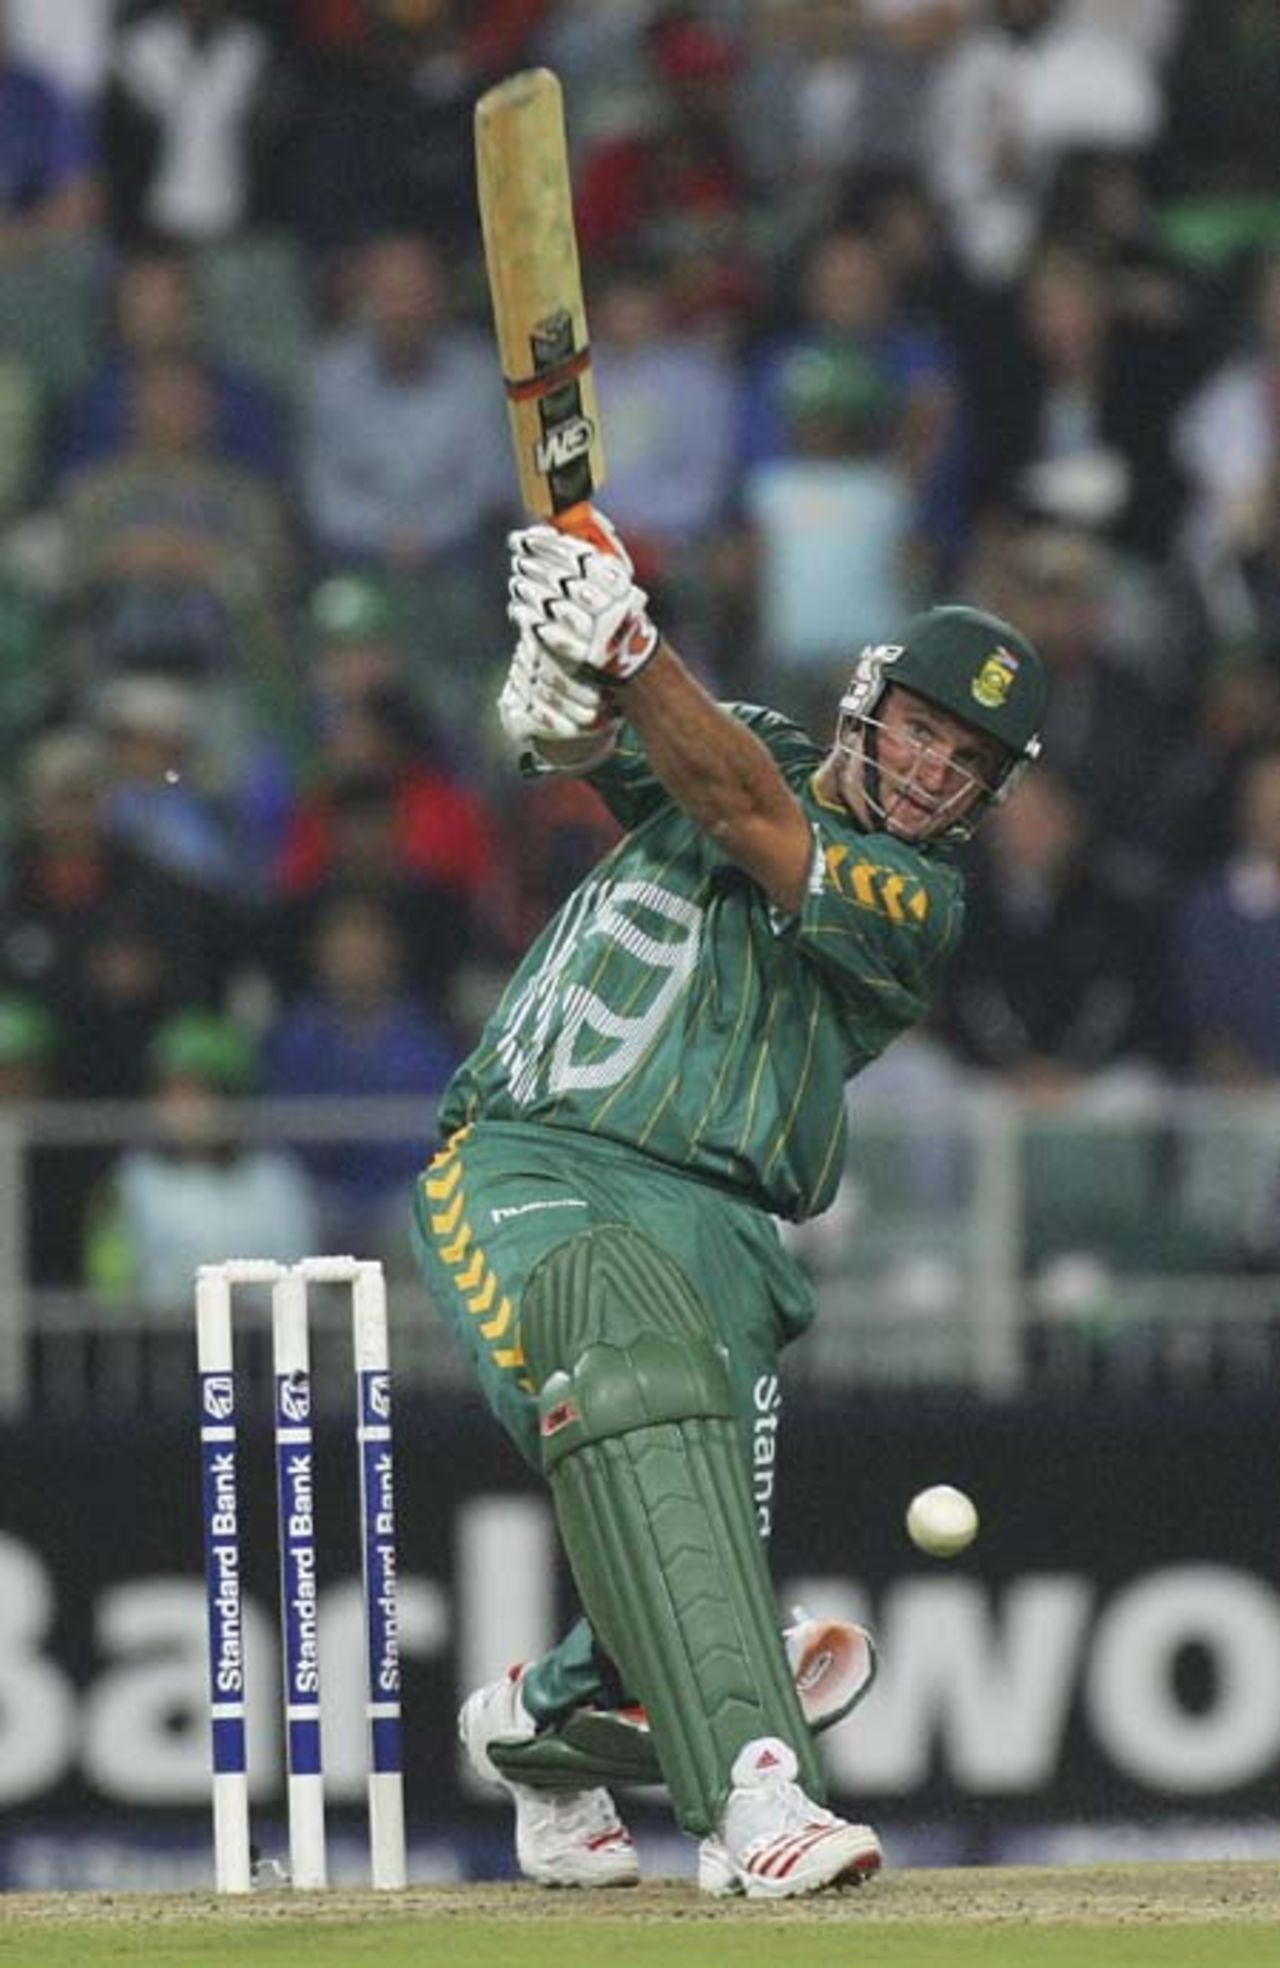 Graeme Smith of South Africa hits out during the Pro 20 match between South Africa and Australia played at the Wanderers Stadium on February 24, 2006 in Johannesburg, South Africa